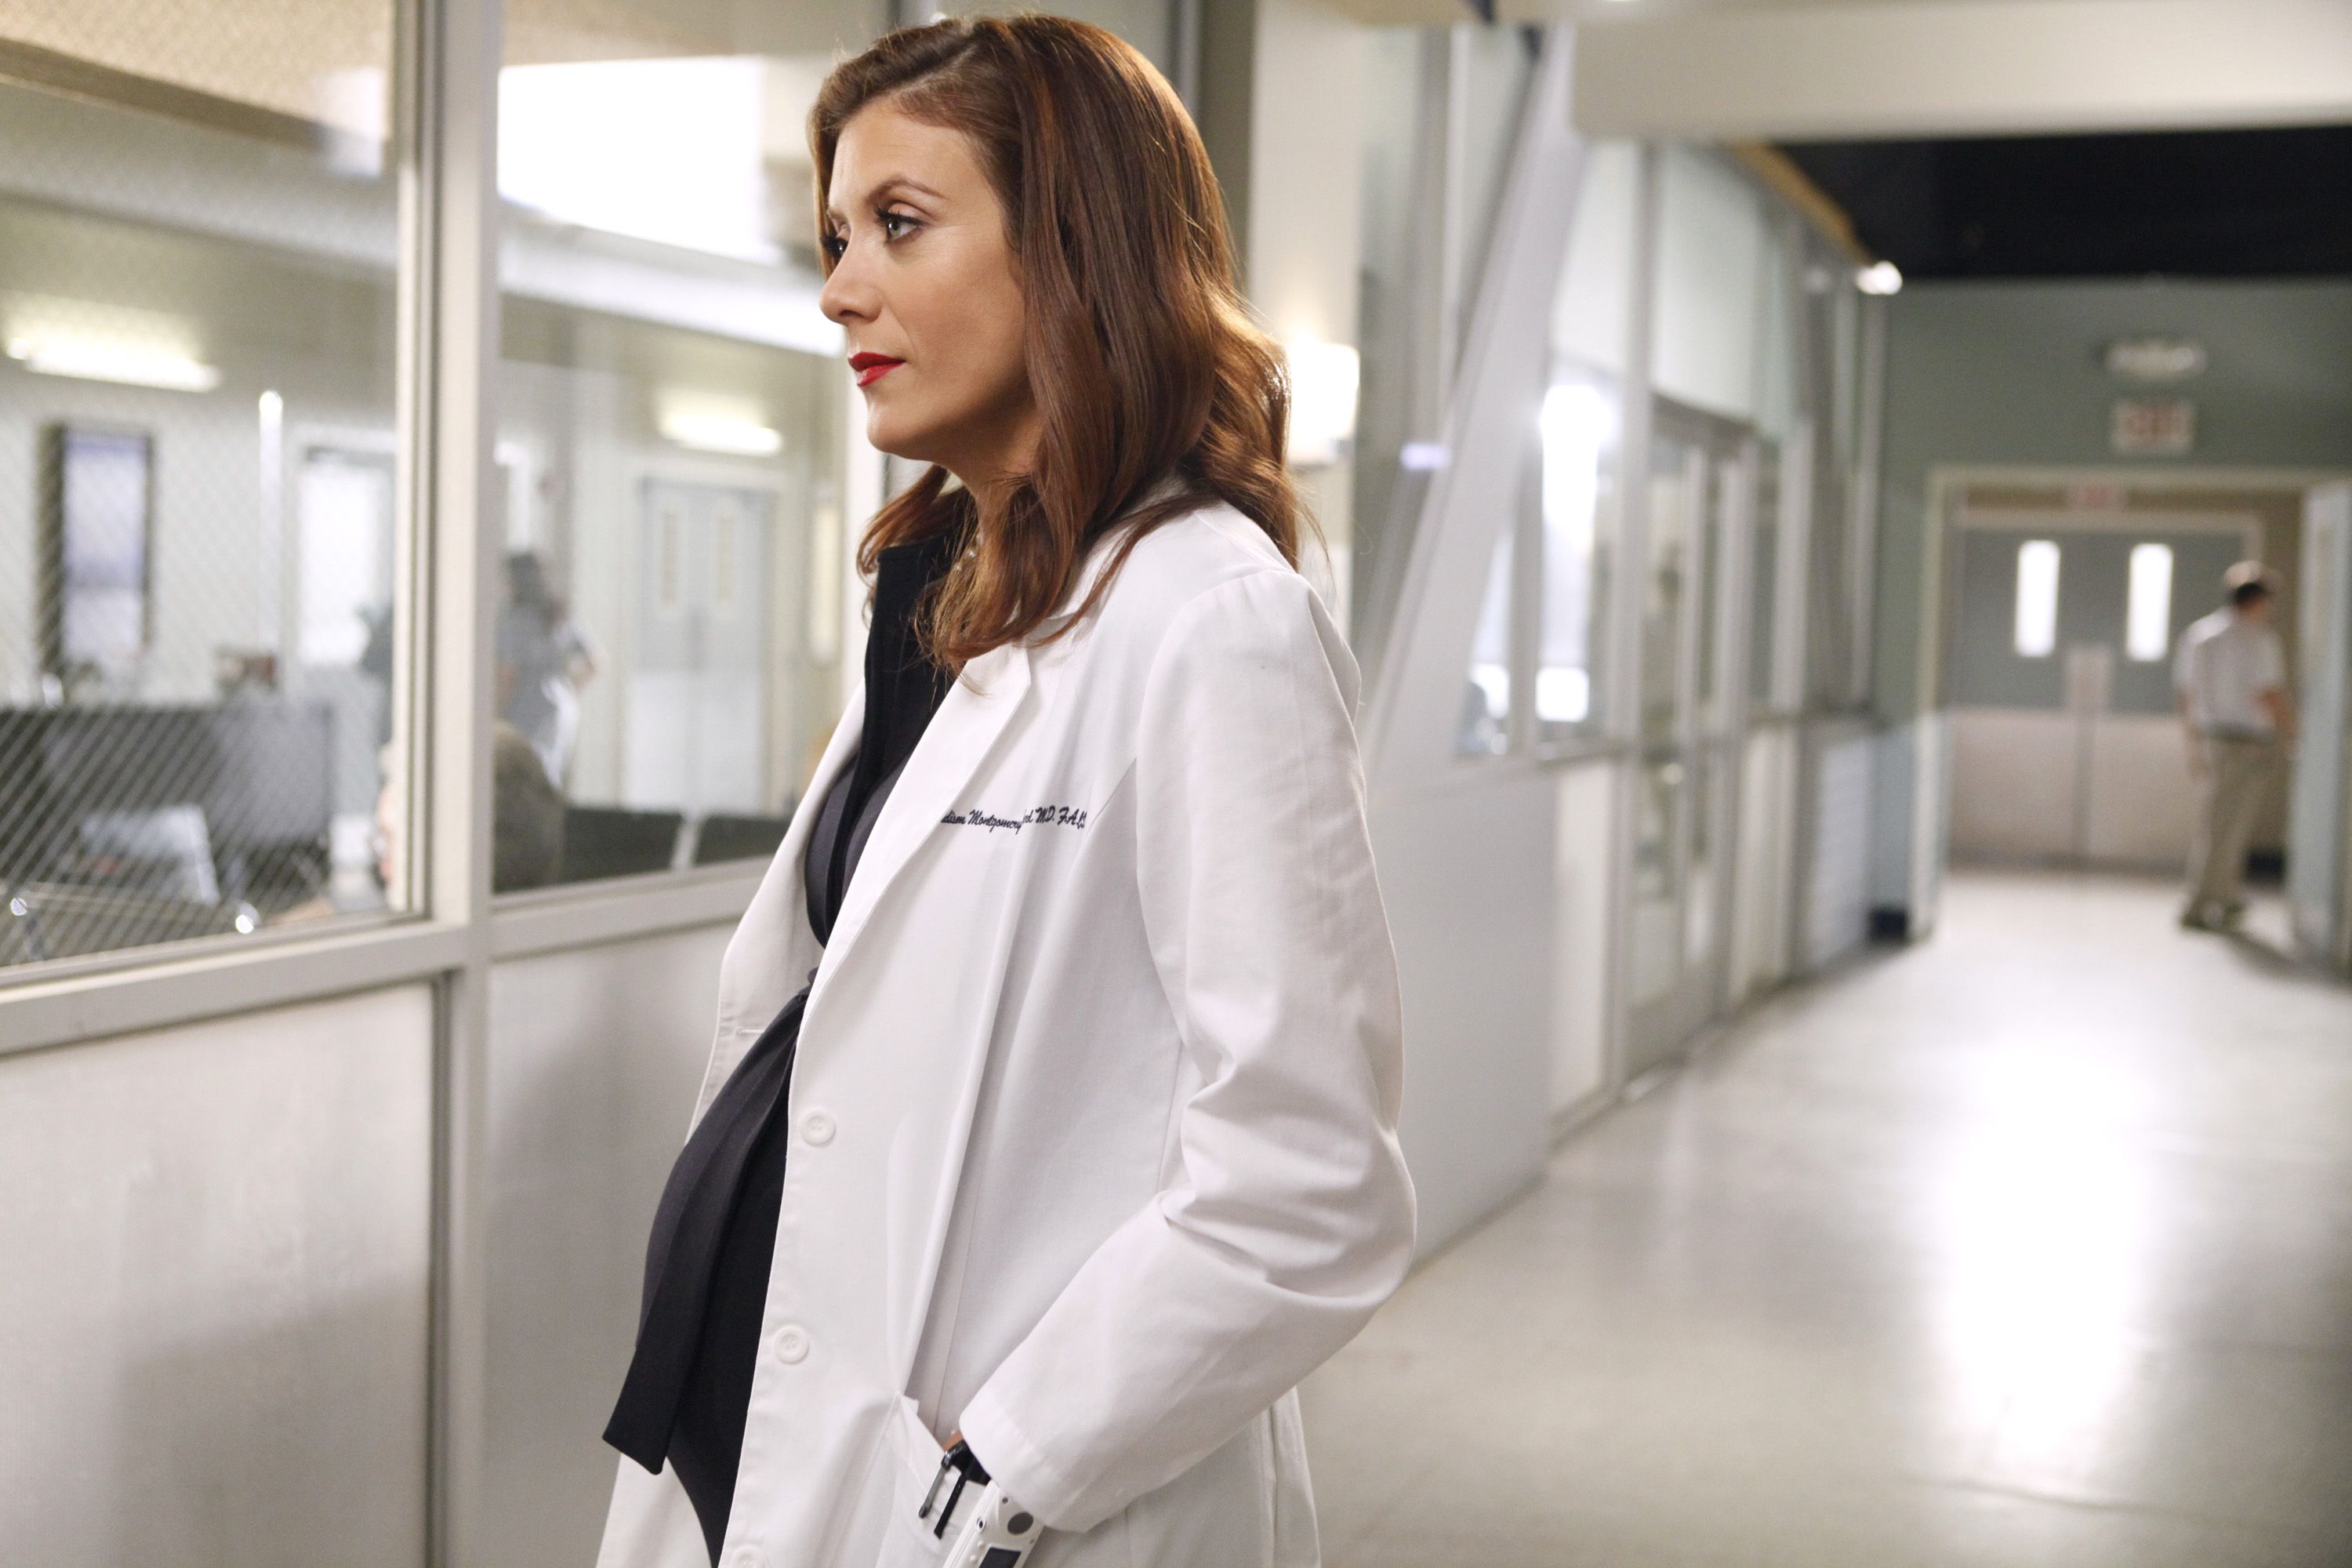 Grey's Anatomy's Kate Walsh would "absolutely" return to the show